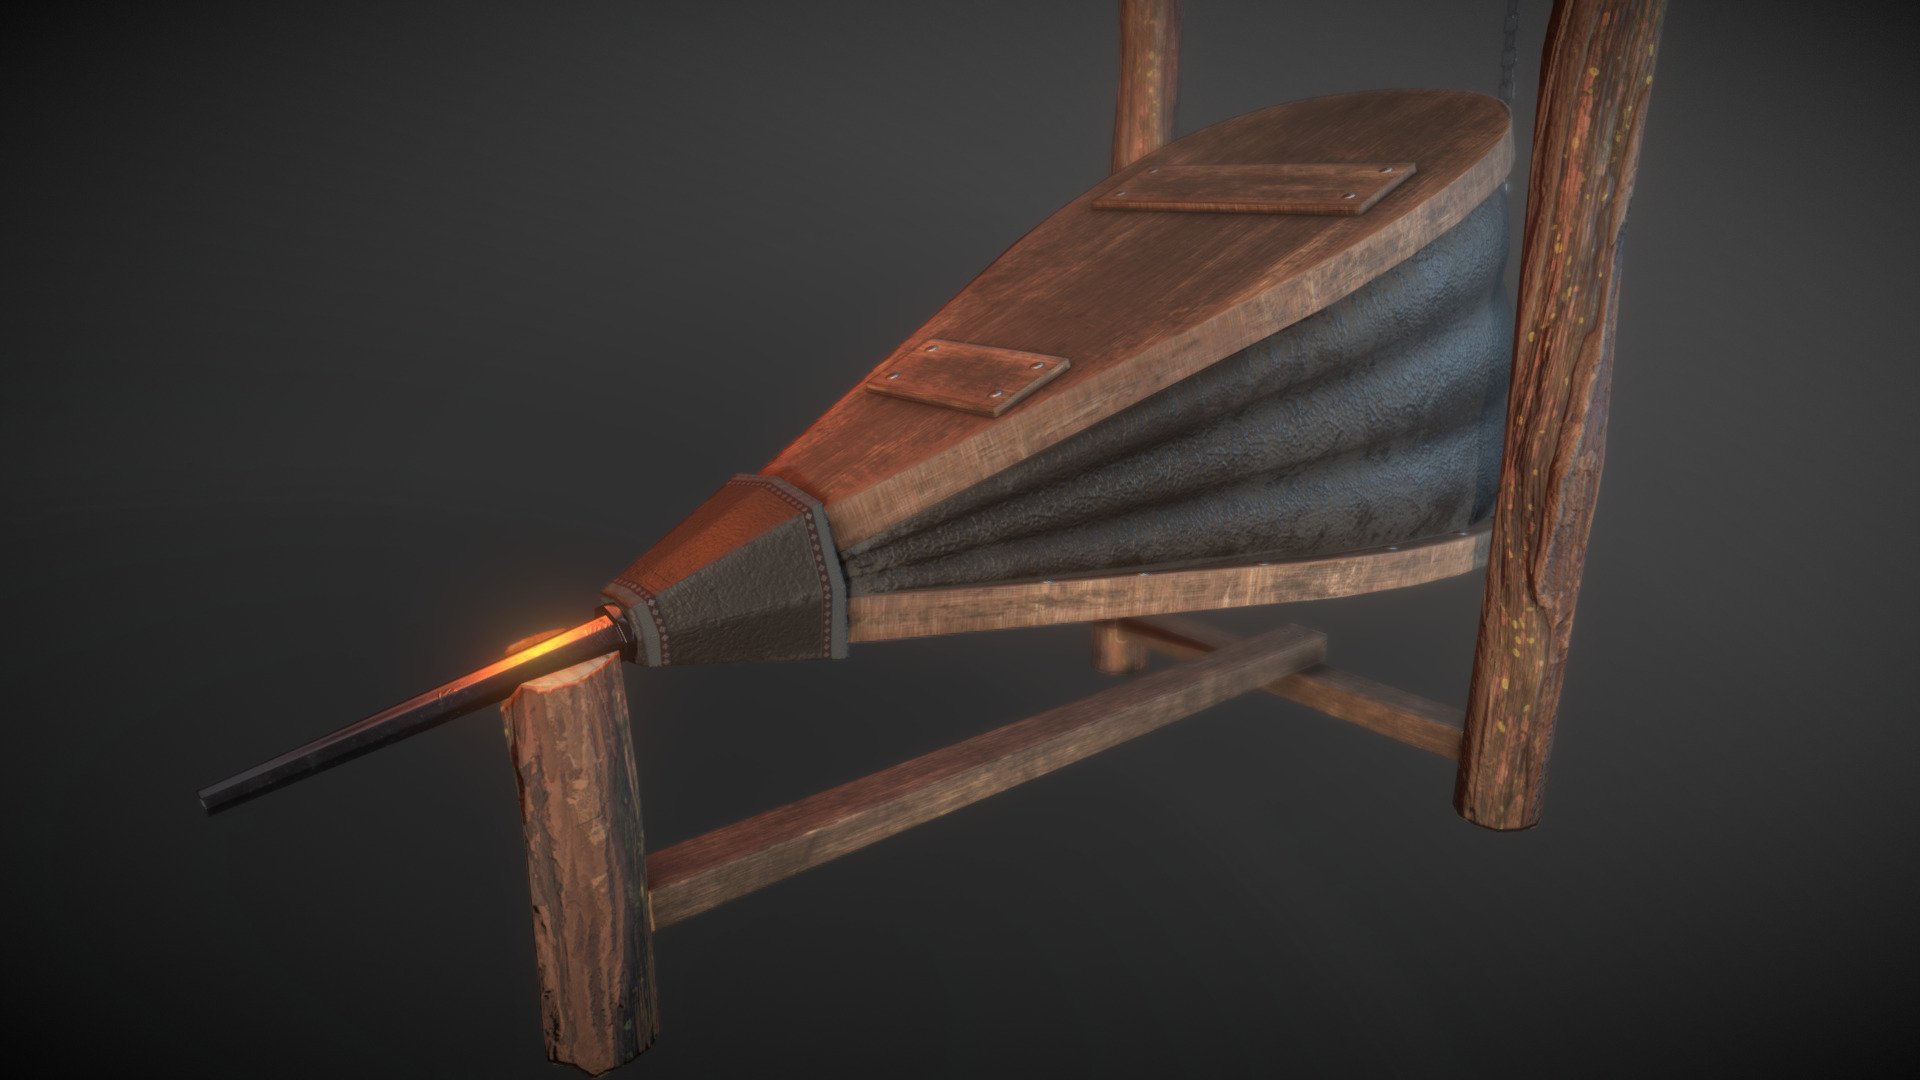 Medieval Blacksmith Bellows - PBR Game Ready low-poly 3d model ready for Virtual Reality (VR), Augmented Reality (AR), games and other real-time apps. 

Textures are available in 2k - Medieval Blacksmith Bellows - Download Free 3D model by TomasKiniulis 3d model